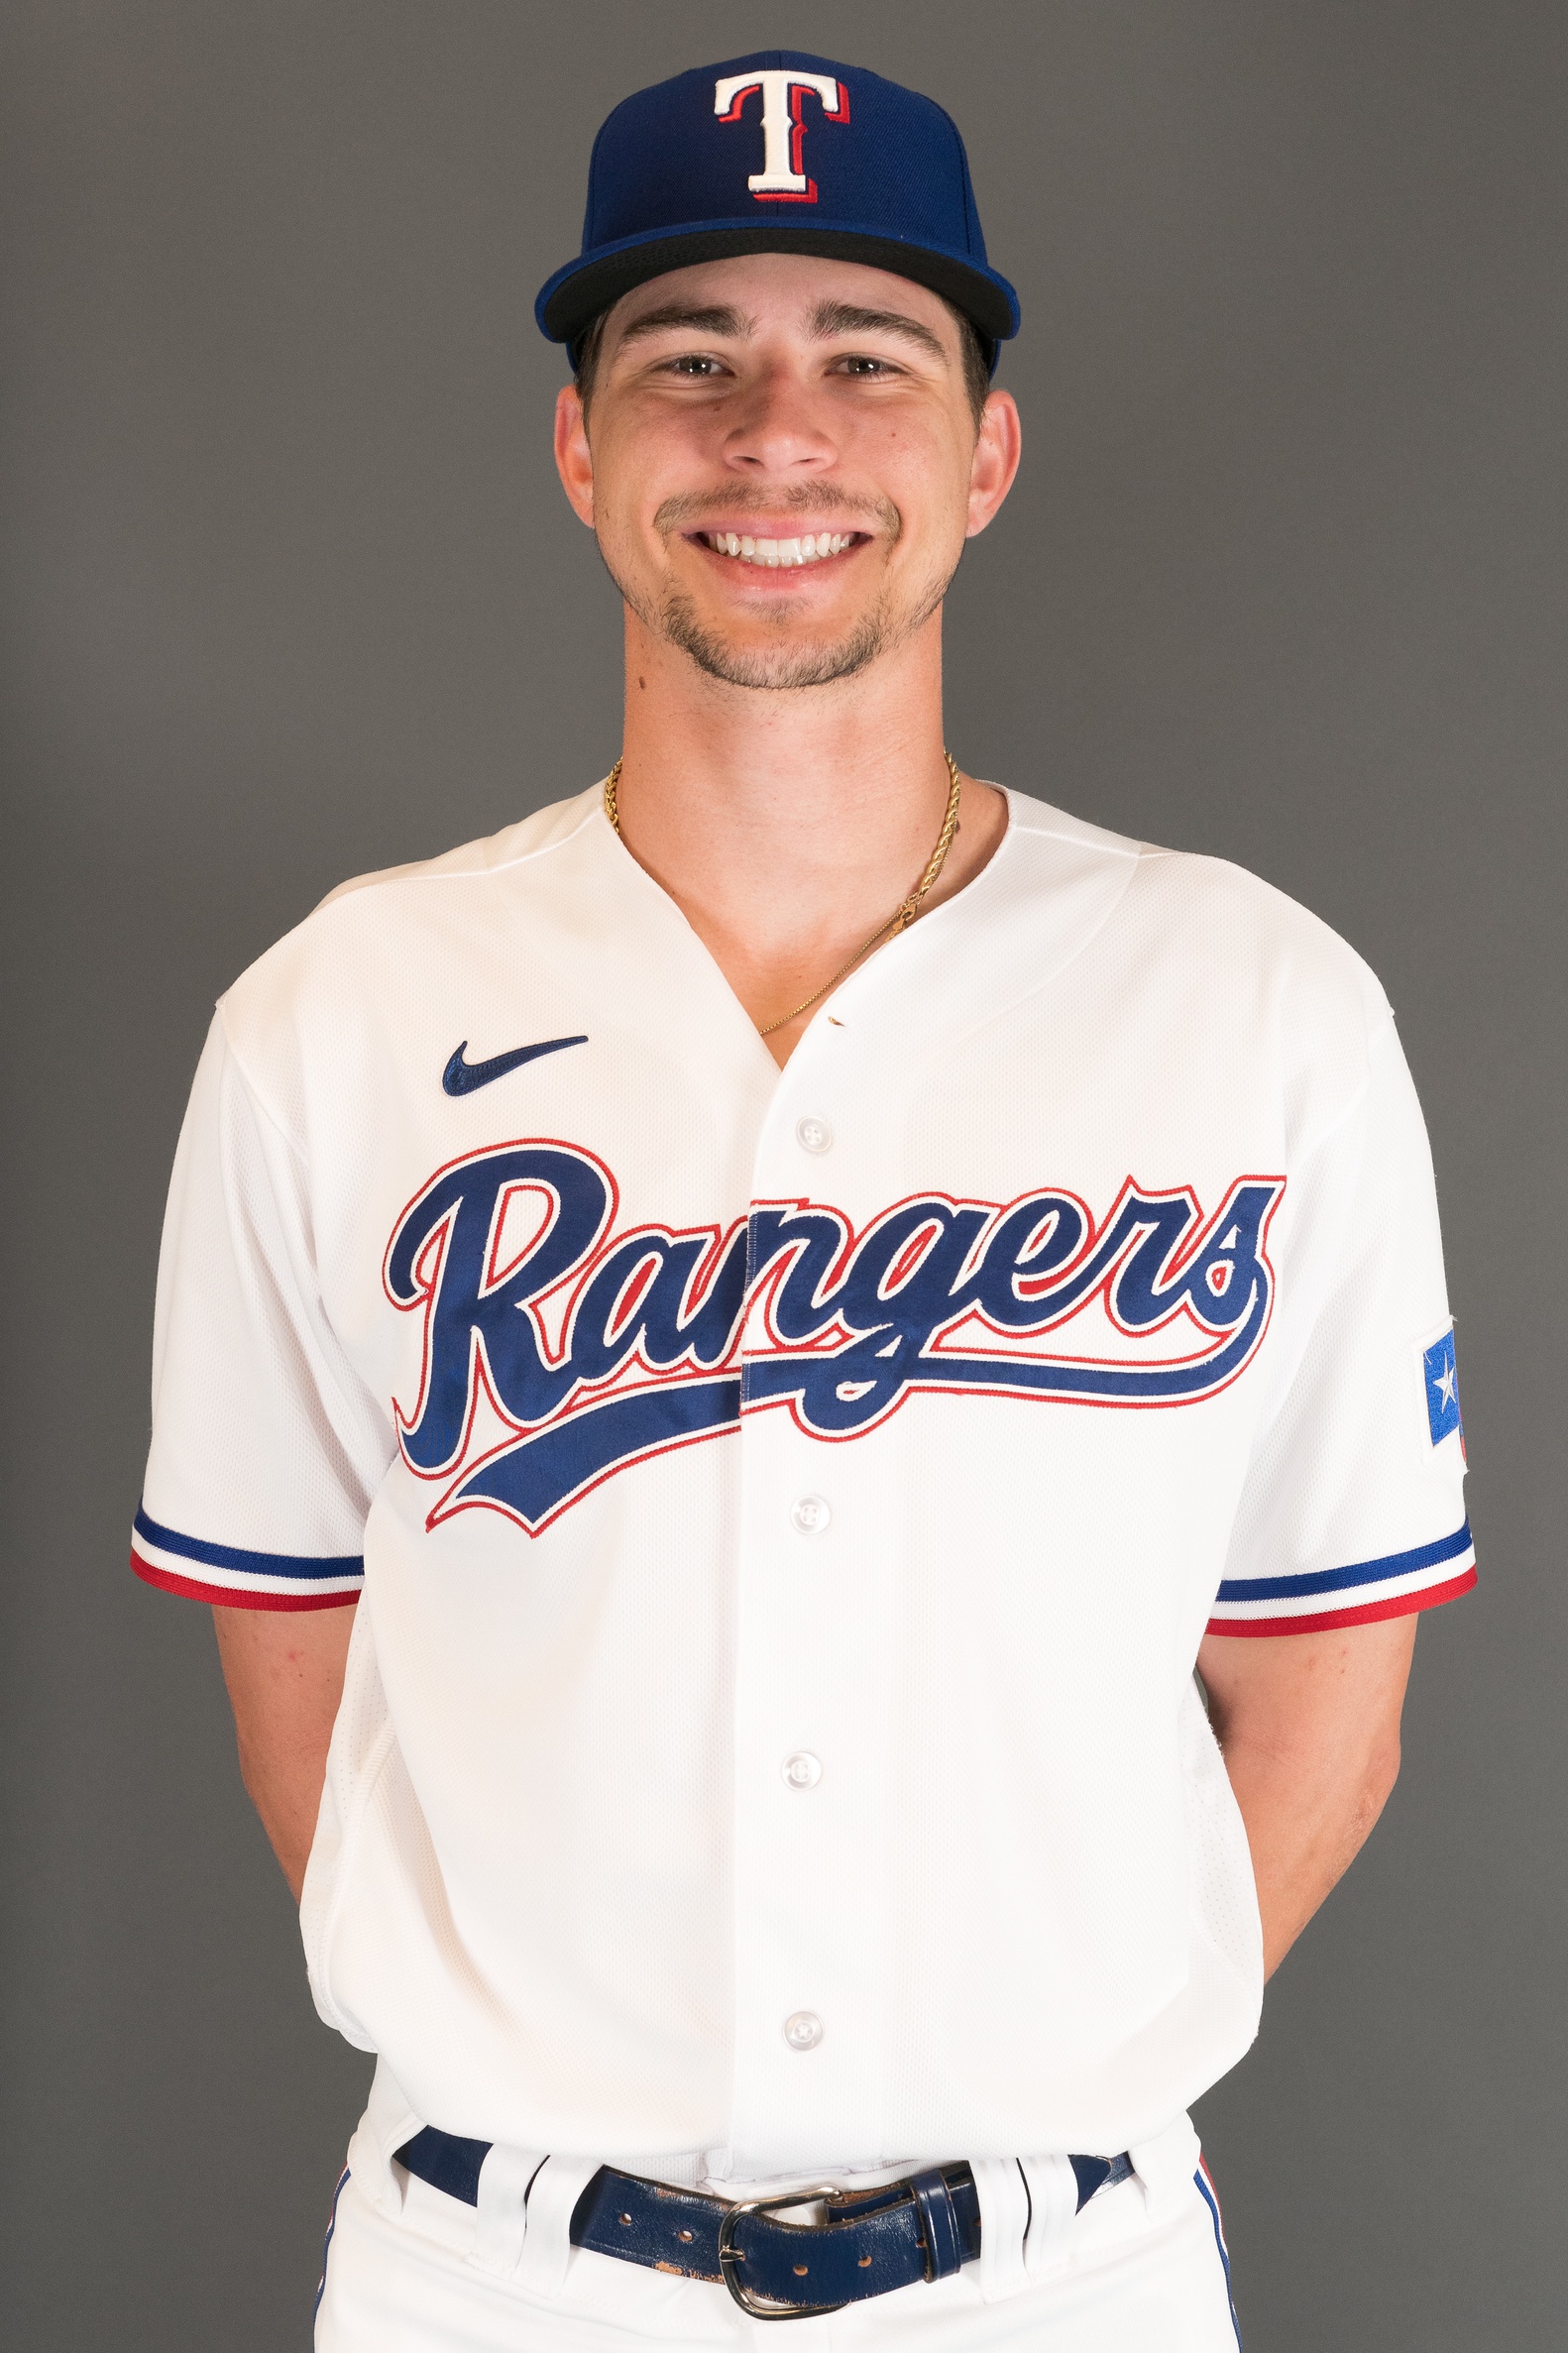 Dodgers News: LA Acquires Minor League Pitcher Ricky Vanasco From Rangers